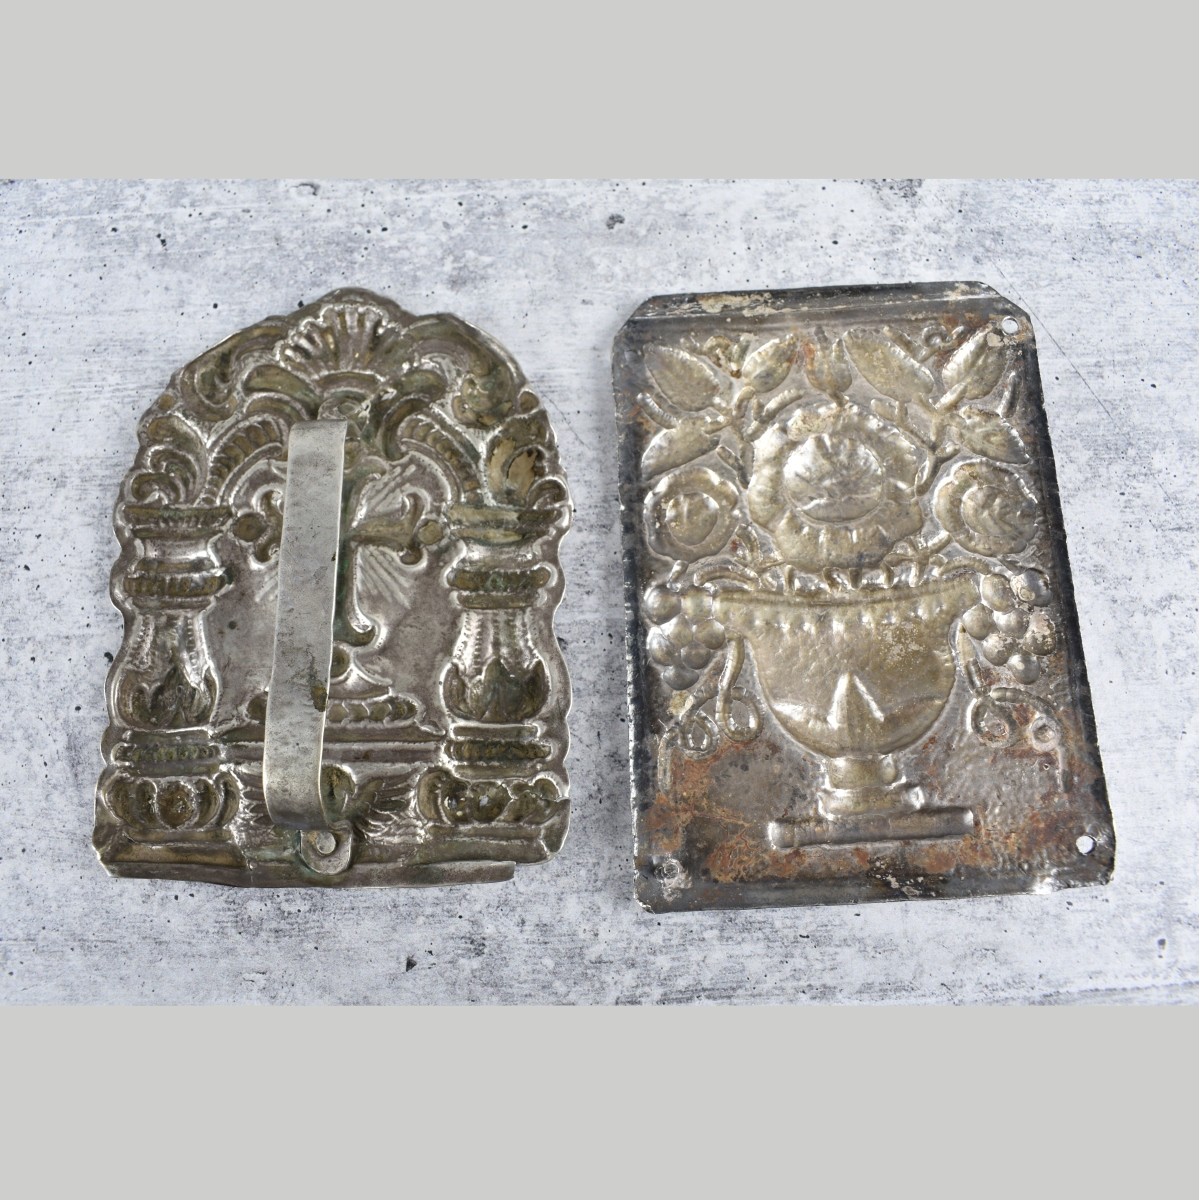 Spanish Colonial Silver Ornaments